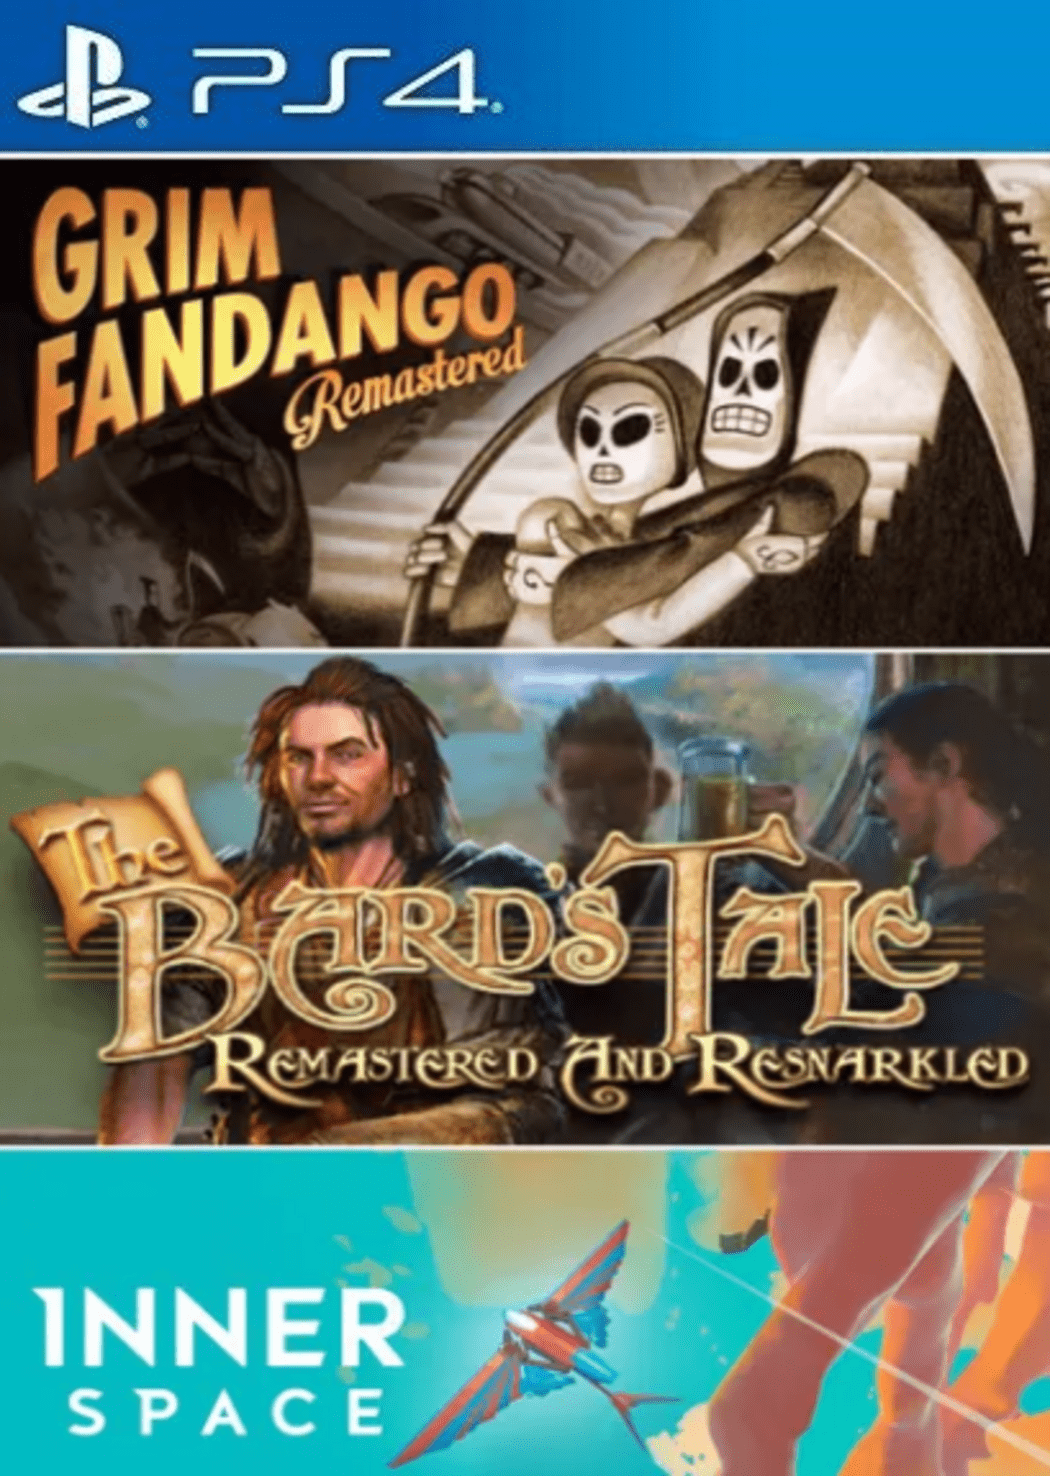 The Bard's Tale: Remastered and Resnarkled, Jogo PS4